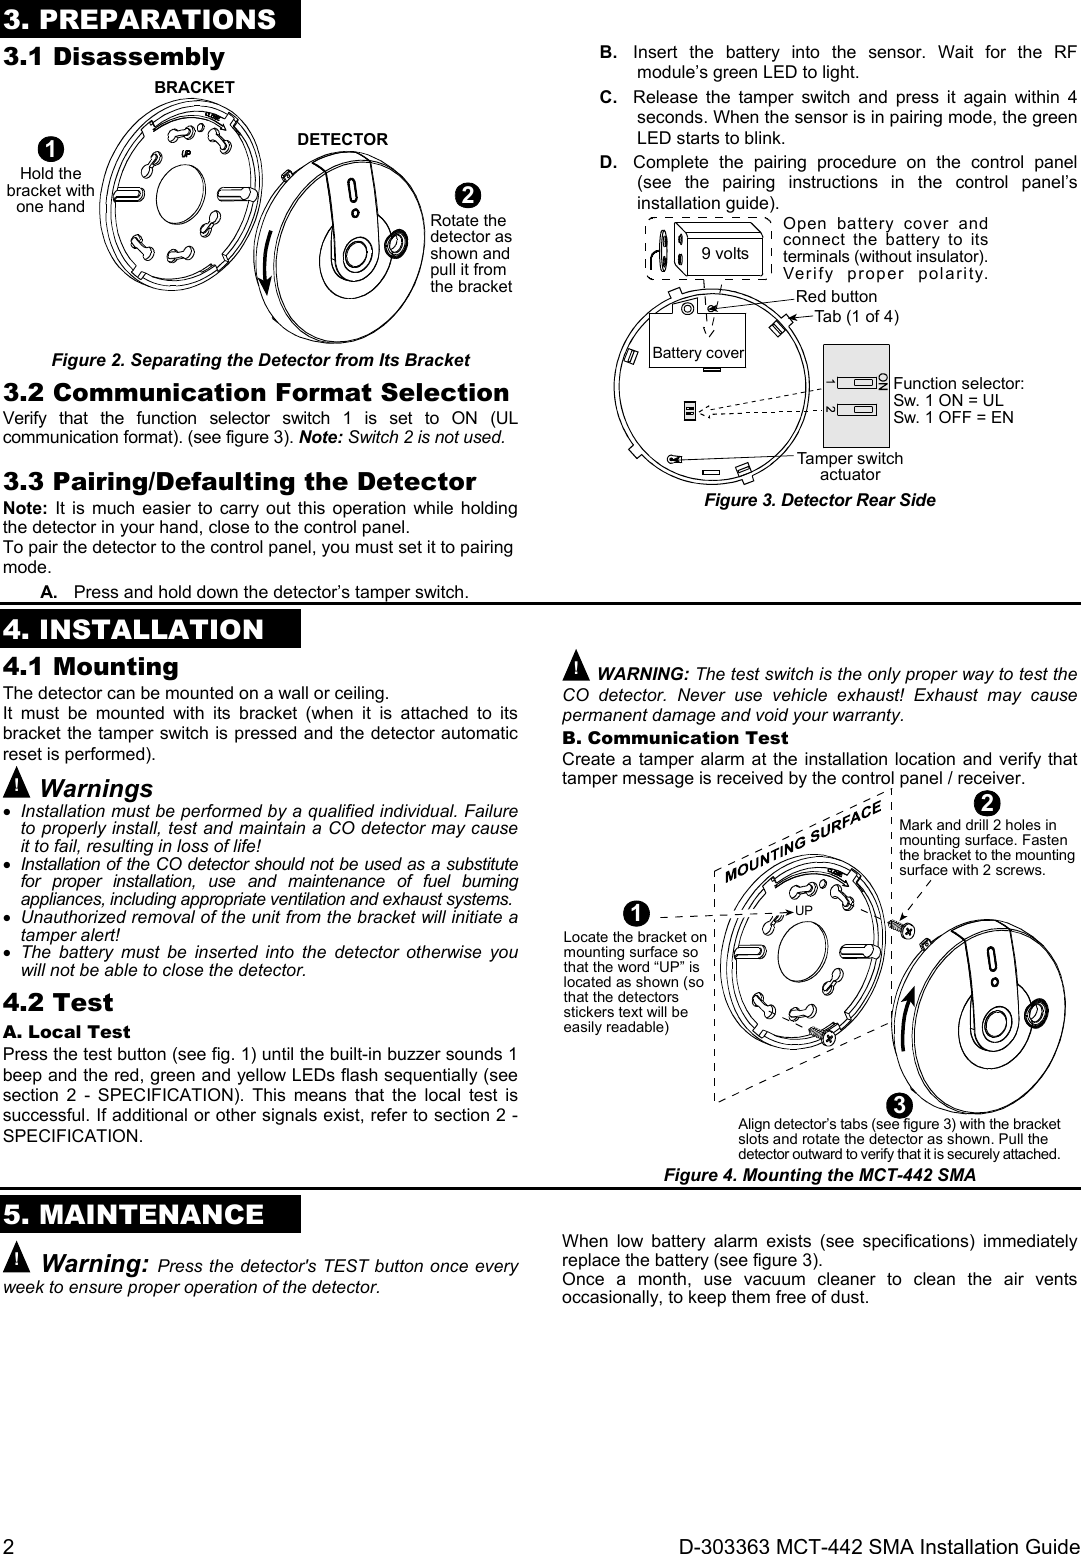 2  D-303363 MCT-442 SMA Installation Guide 3. PREPARATIONS 3.1 Disassembly BRACKETDETECTOR1Hold thebracket withone hand2Rotate thedetector asshown andpull it fromthe bracket Figure 2. Separating the Detector from Its Bracket 3.2 Communication Format Selection Verify that the function selector switch 1 is set to ON (UL communication format). (see figure 3). Note: Switch 2 is not used.  3.3 Pairing/Defaulting the Detector Note: It is much easier to carry out this operation while holding the detector in your hand, close to the control panel. To pair the detector to the control panel, you must set it to pairing mode. A.  Press and hold down the detector’s tamper switch. B.  Insert the battery into the sensor. Wait for the RF module’s green LED to light. C.  Release the tamper switch and press it again within 4 seconds. When the sensor is in pairing mode, the green LED starts to blink. D.  Complete the pairing procedure on the control panel (see the pairing instructions in the control panel’s installation guide). Battery coverFunction selector:Sw. 1 ON = ULSw. 1 OFF = EN9 voltsOpen battery cover andconnect the battery to itsterminals (without insulator).Verify proper polarity.Tamper switchactuatorTab (1 of 4)Red button Figure 3. Detector Rear Side  4. INSTALLATION 4.1 Mounting The detector can be mounted on a wall or ceiling. It must be mounted with its bracket (when it is attached to its bracket the tamper switch is pressed and the detector automatic reset is performed). ! Warnings  Installation must be performed by a qualified individual. Failure to properly install, test and maintain a CO detector may cause it to fail, resulting in loss of life!  Installation of the CO detector should not be used as a substitute for proper installation, use and maintenance of fuel burning appliances, including appropriate ventilation and exhaust systems.  Unauthorized removal of the unit from the bracket will initiate a tamper alert!  The battery must be inserted into the detector otherwise you will not be able to close the detector. 4.2 Test A. Local Test Press the test button (see fig. 1) until the built-in buzzer sounds 1 beep and the red, green and yellow LEDs flash sequentially (see section 2 - SPECIFICATION). This means that the local test is successful. If additional or other signals exist, refer to section 2 - SPECIFICATION. ! WARNING: The test switch is the only proper way to test the CO detector. Never use vehicle exhaust! Exhaust may cause permanent damage and void your warranty. B. Communication Test Create a tamper alarm at the installation location and verify that tamper message is received by the control panel / receiver. 1Locate the bracket onmounting surface sothat the word “UP” islocated as shown (sothat the detectorsstickers text will beeasily readable)Mark and drill 2 holes inmounting surface. Fastenthe bracket to the mountingsurface with 2 screws.Align detector’s tabs (see figure 3) with the bracketslots and rotate the detector as shown. Pull thedetector outward to verify that it is securely attached.23UP Figure 4. Mounting the MCT-442 SMA   5. MAINTENANCE ! Warning: Press the detector&apos;s TEST button once every week to ensure proper operation of the detector. When low battery alarm exists (see specifications) immediately replace the battery (see figure 3). Once a month, use vacuum cleaner to clean the air vents occasionally, to keep them free of dust. 